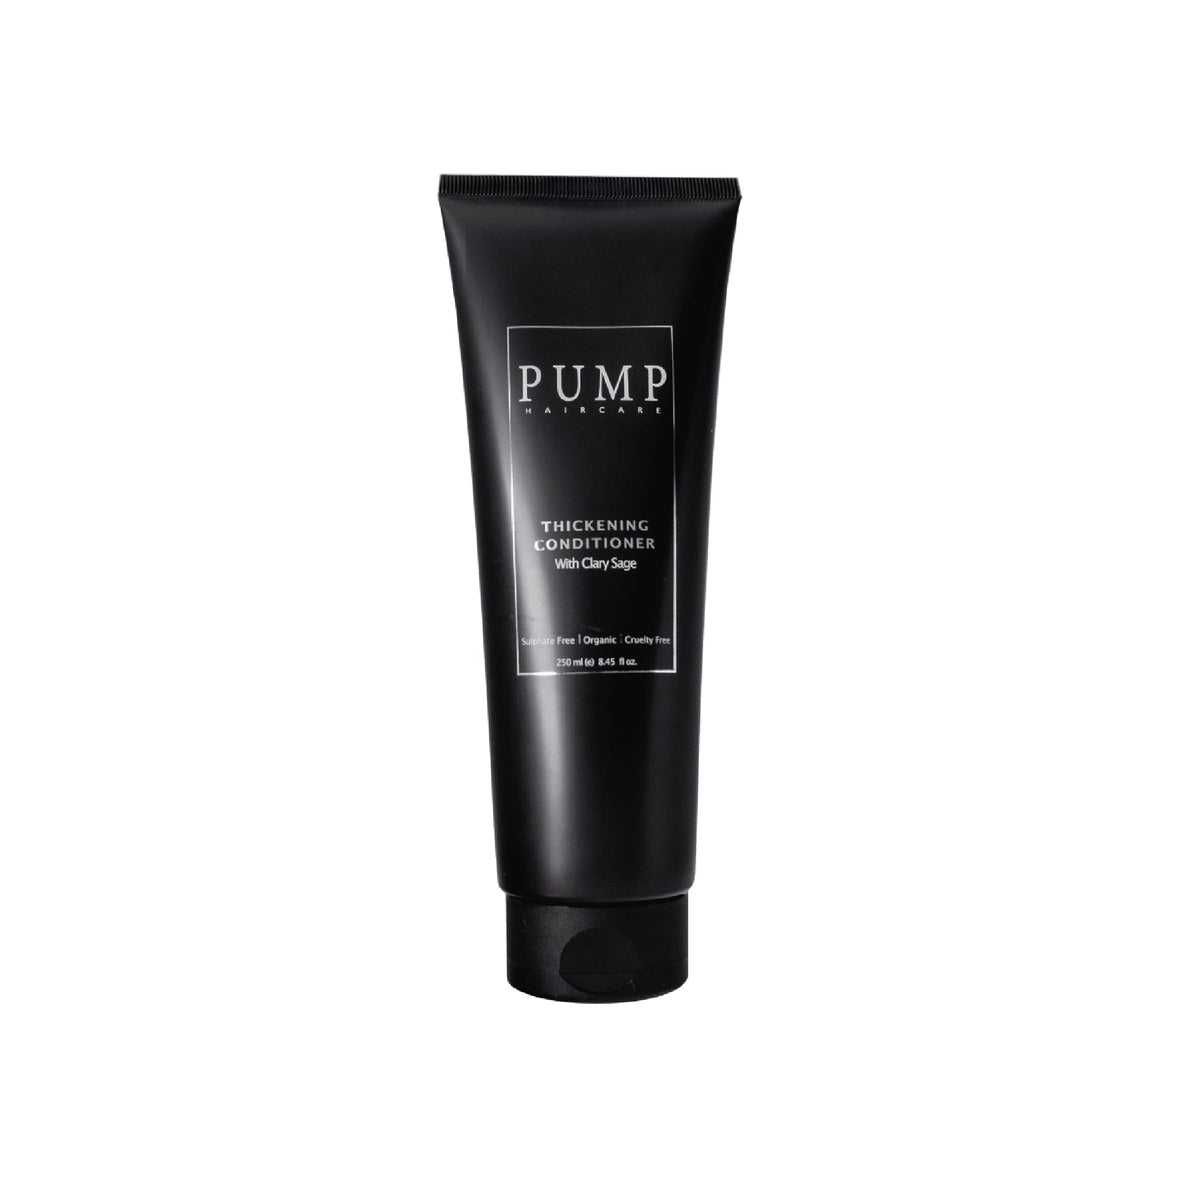 Pump Thickening Conditioner - Haircare Superstore